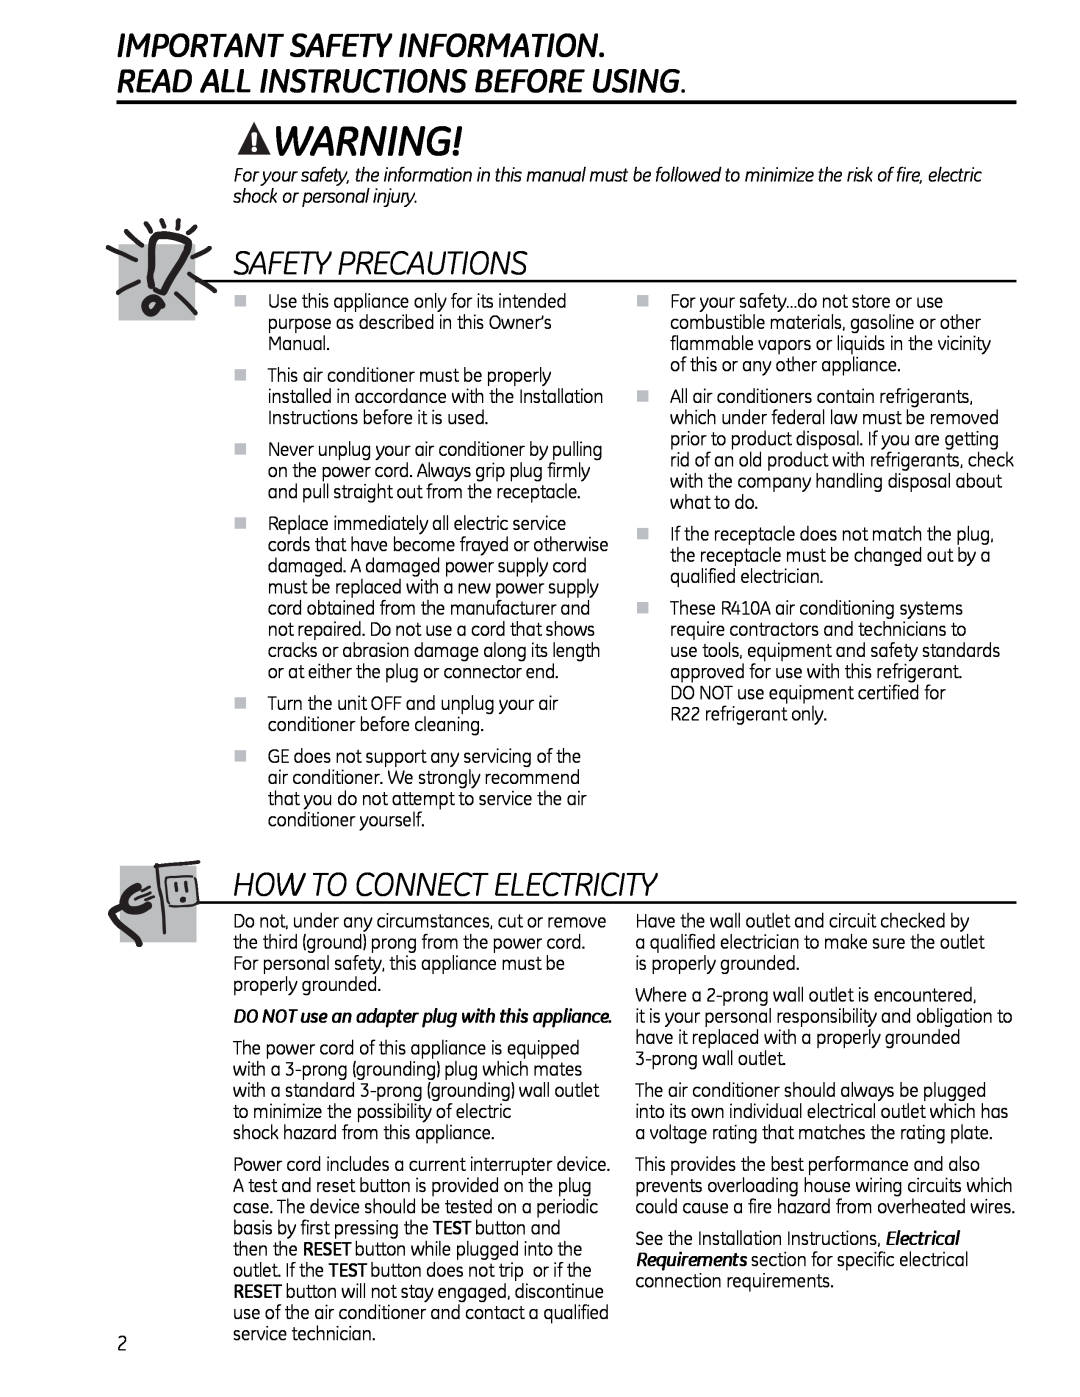 GE AHM24 Important Safety Information, Read All Instructions Before Using, Safety Precautions, How To Connect Electricity 